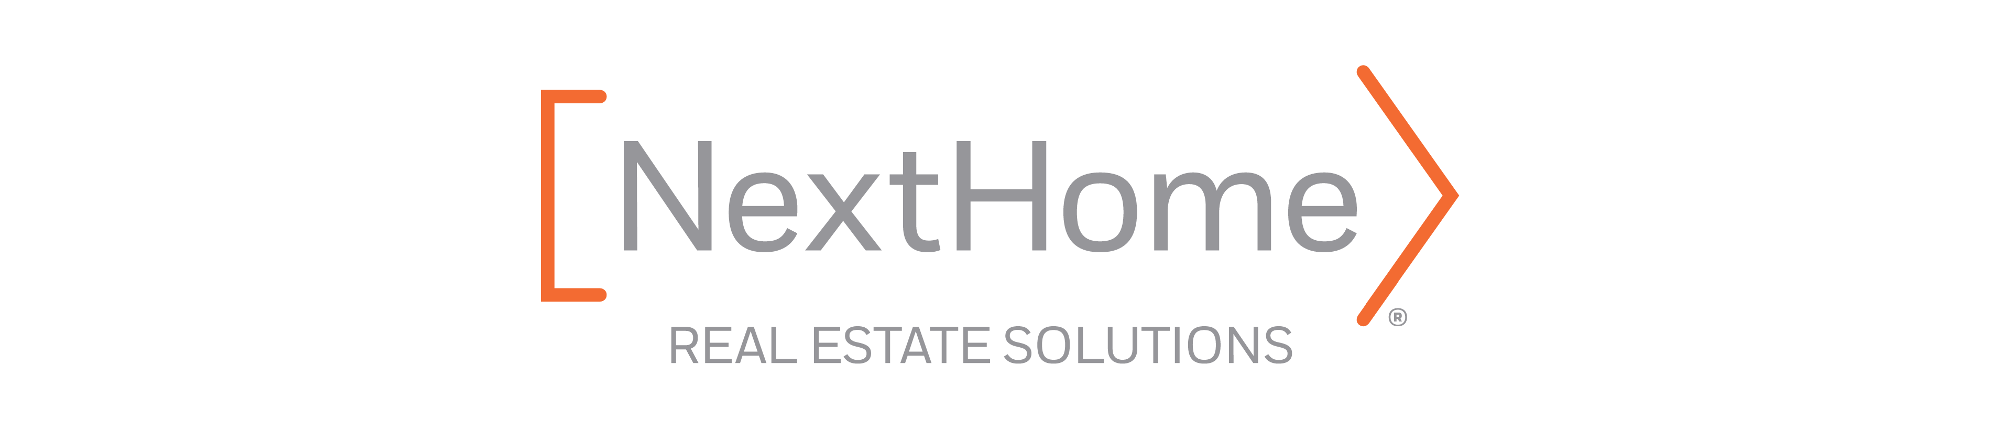 NextHome Real Estate Solutions